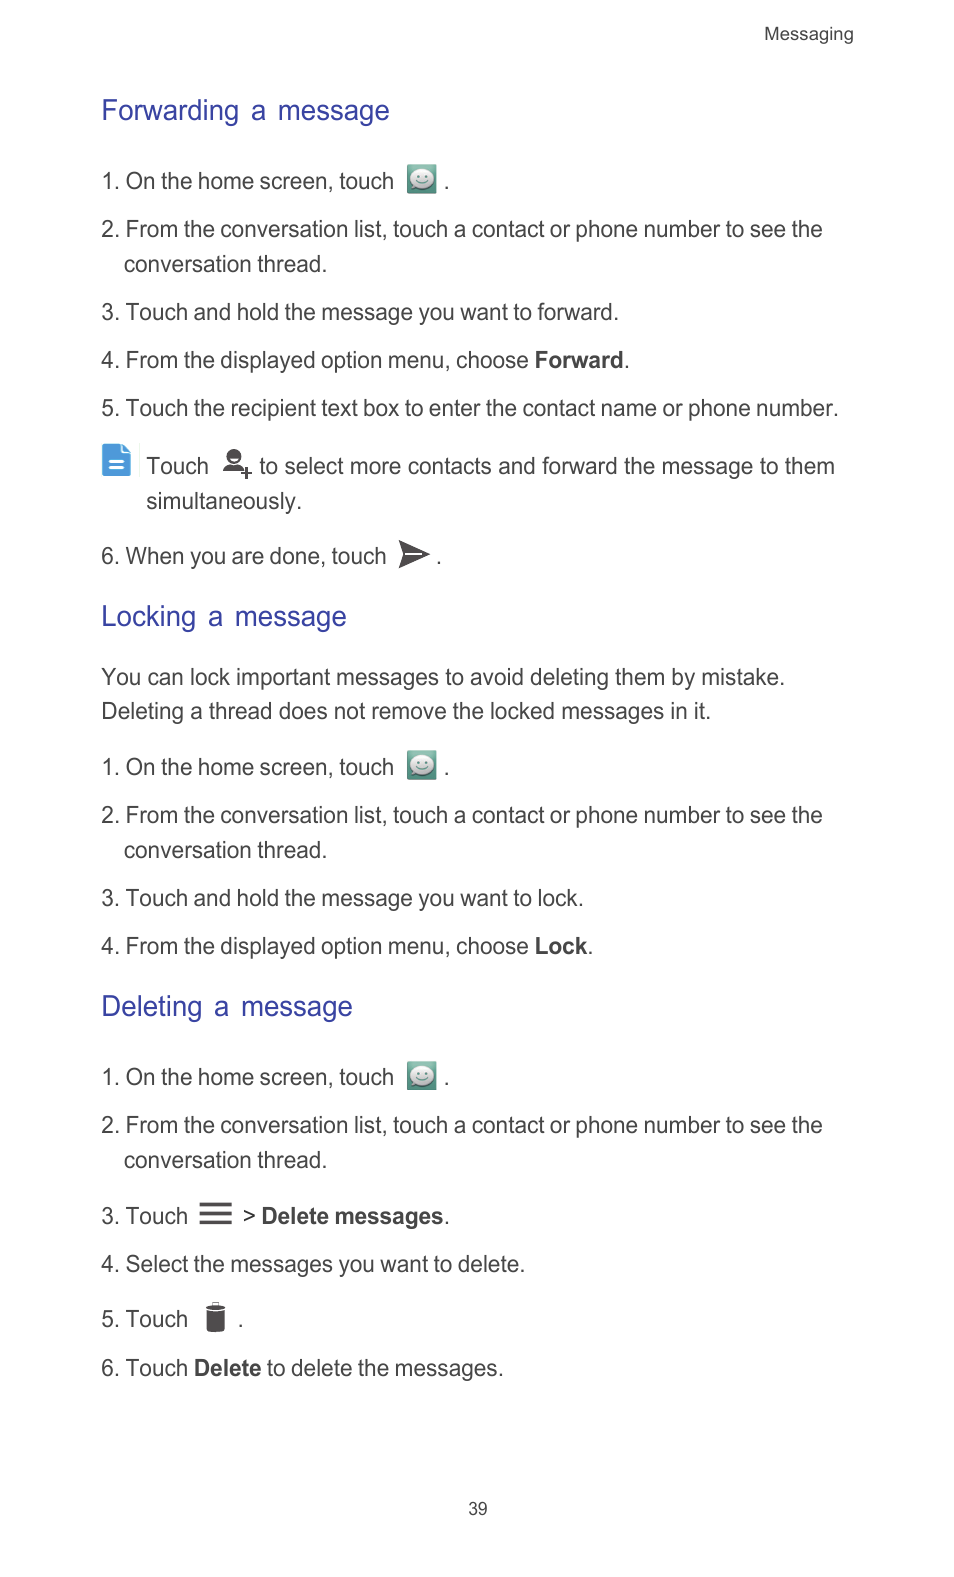 Forwarding a message, Locking a message, Deleting a message | Huawei Ascend G510 User Guide User Manual | Page 44 / 93